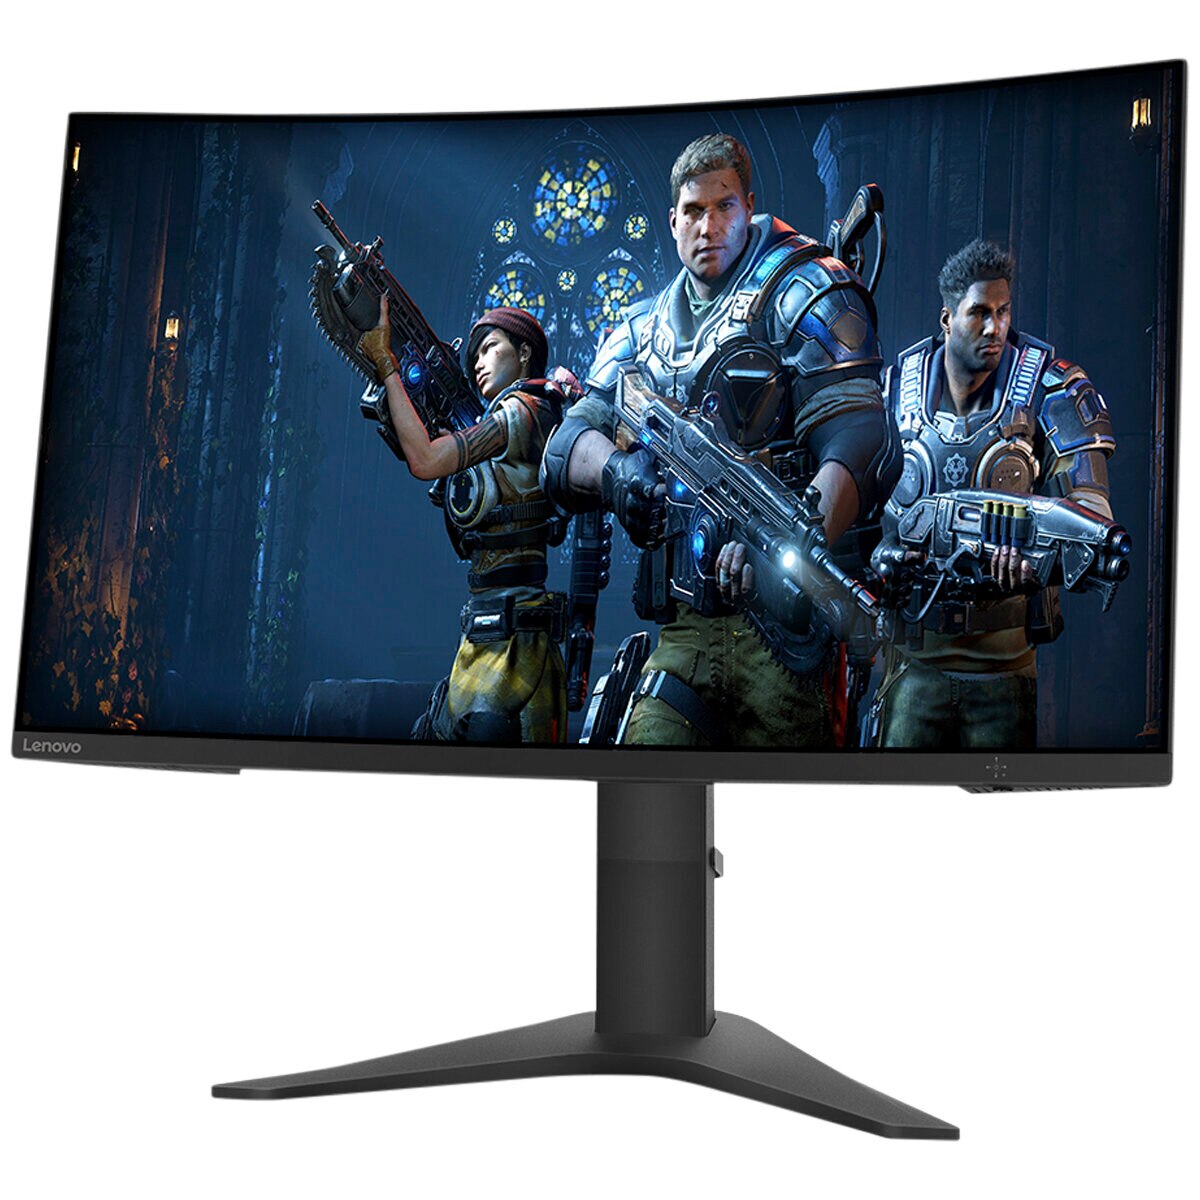 Lenovo G27c-10 27 Inch Curved WLED Backlit LCD Gaming Monitor 66A3GACBAU